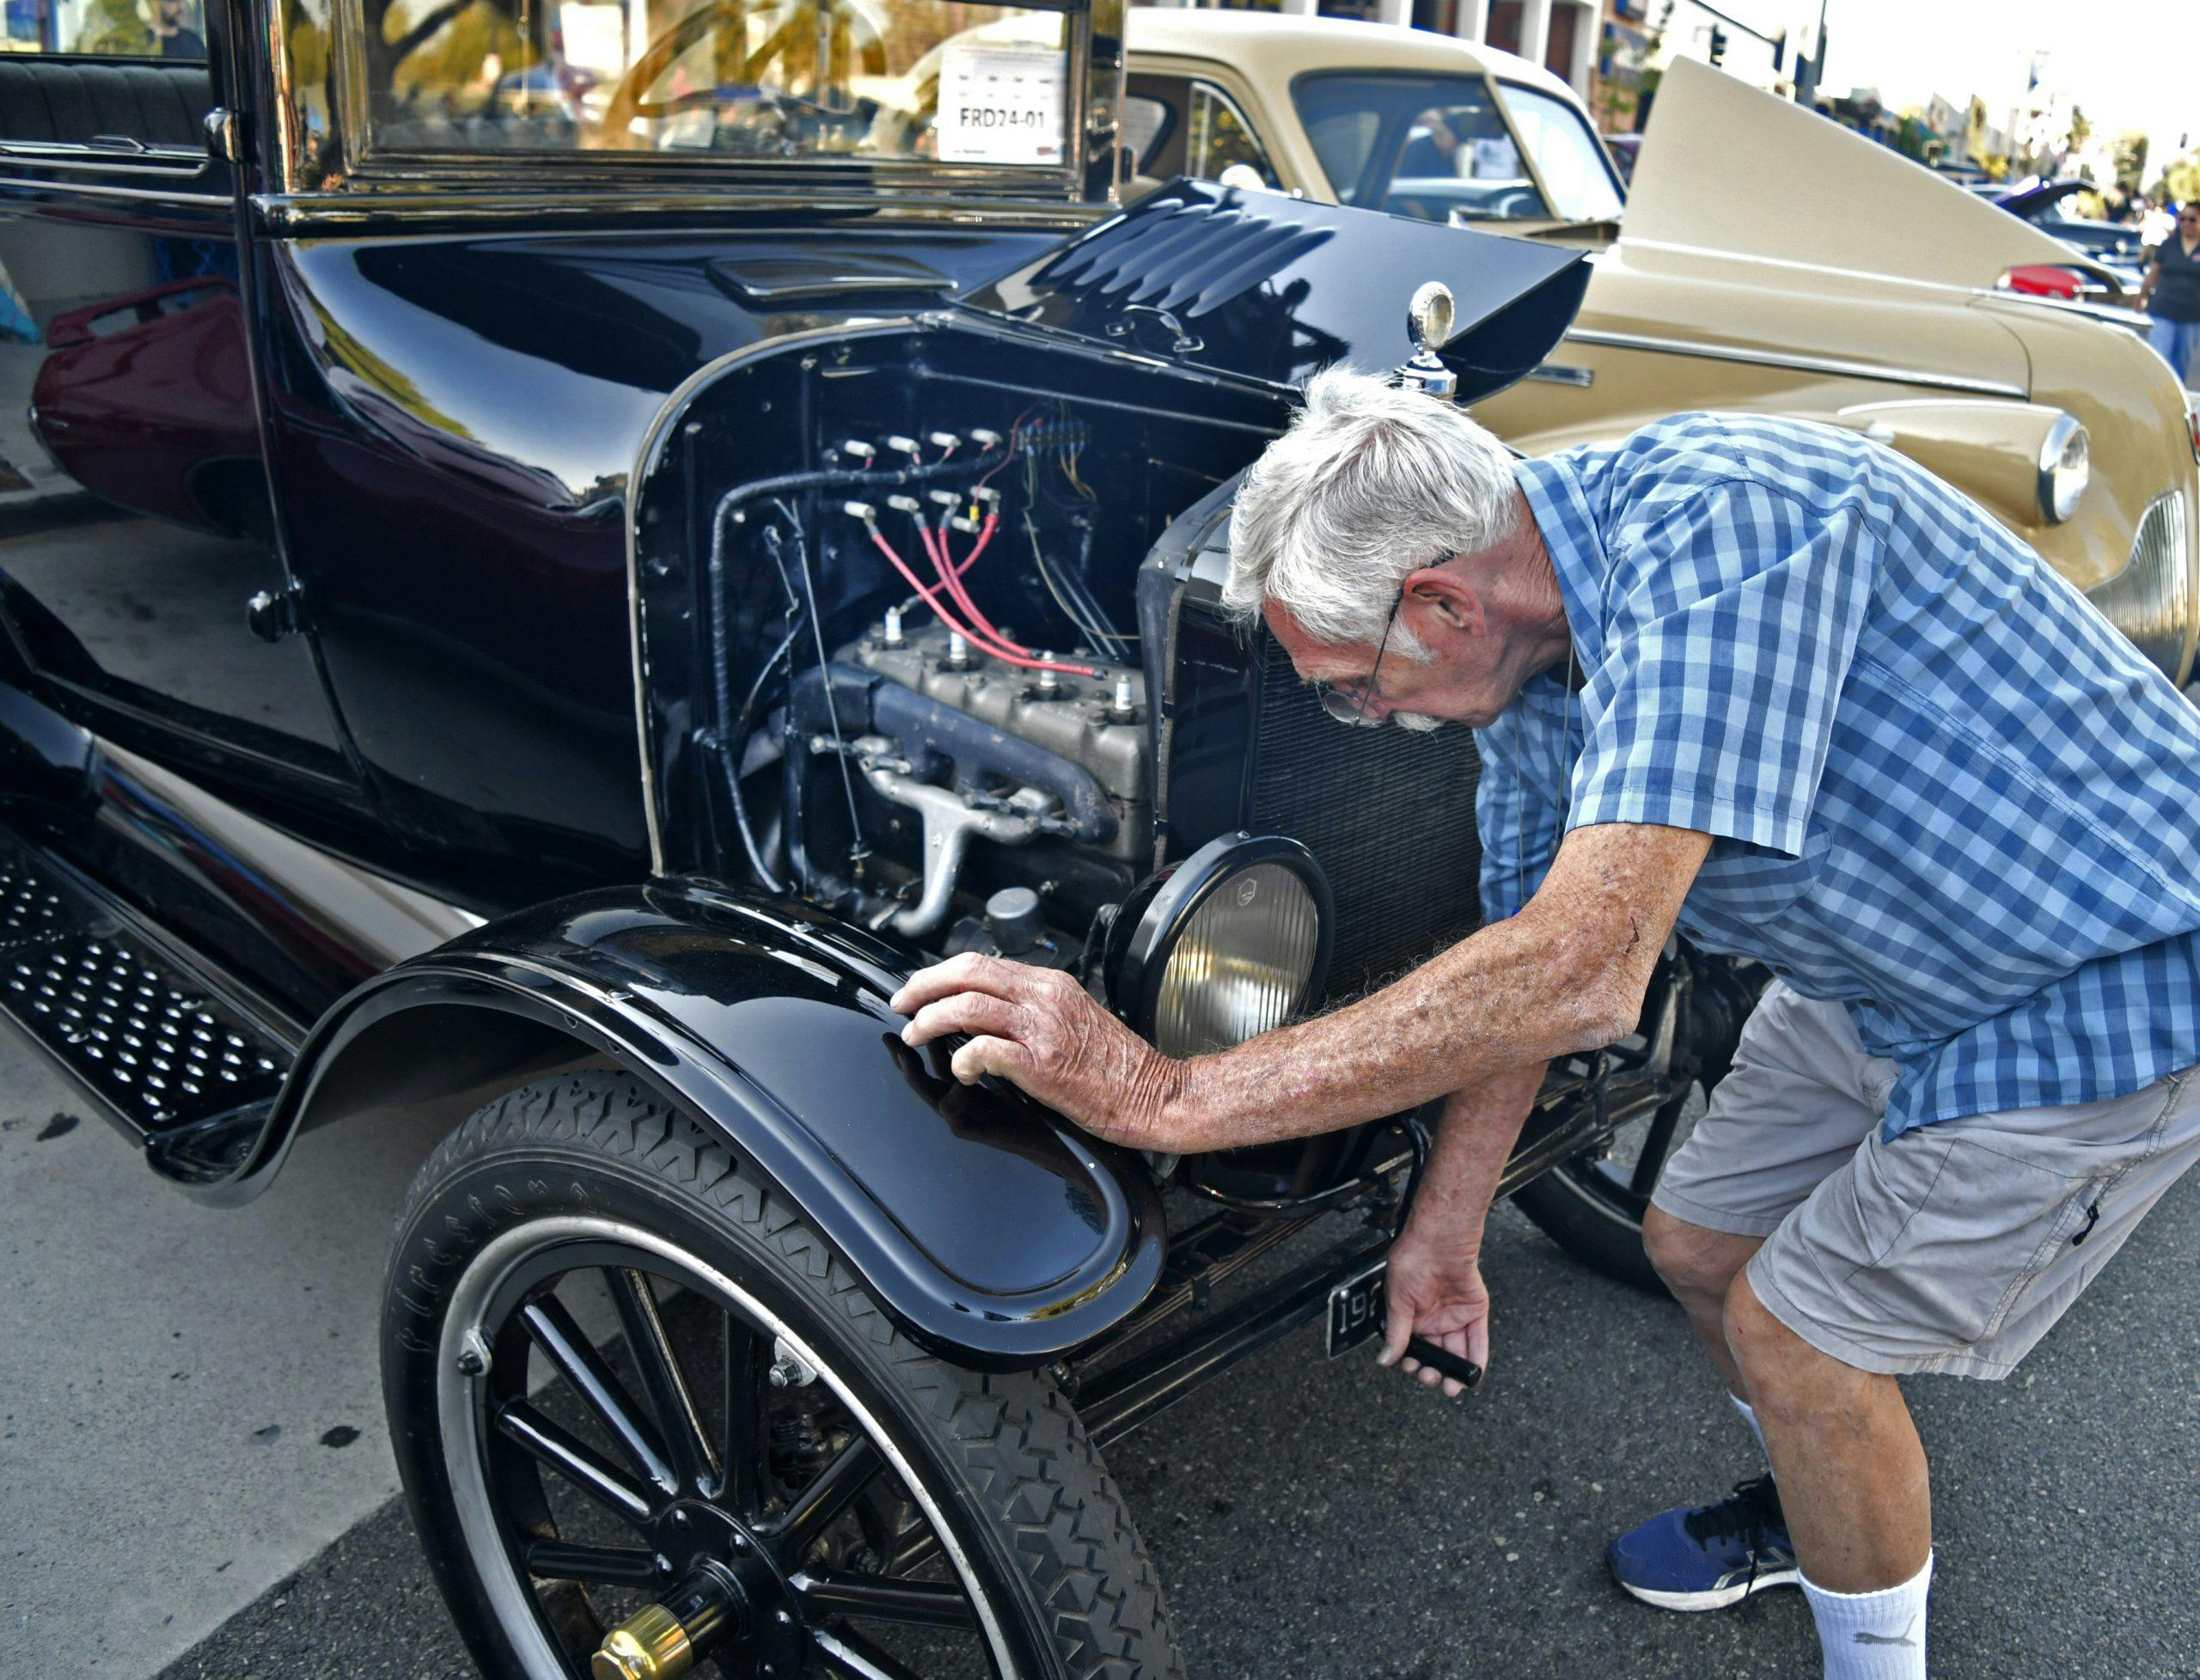 Route 66 Reunion model t ford engine cranking